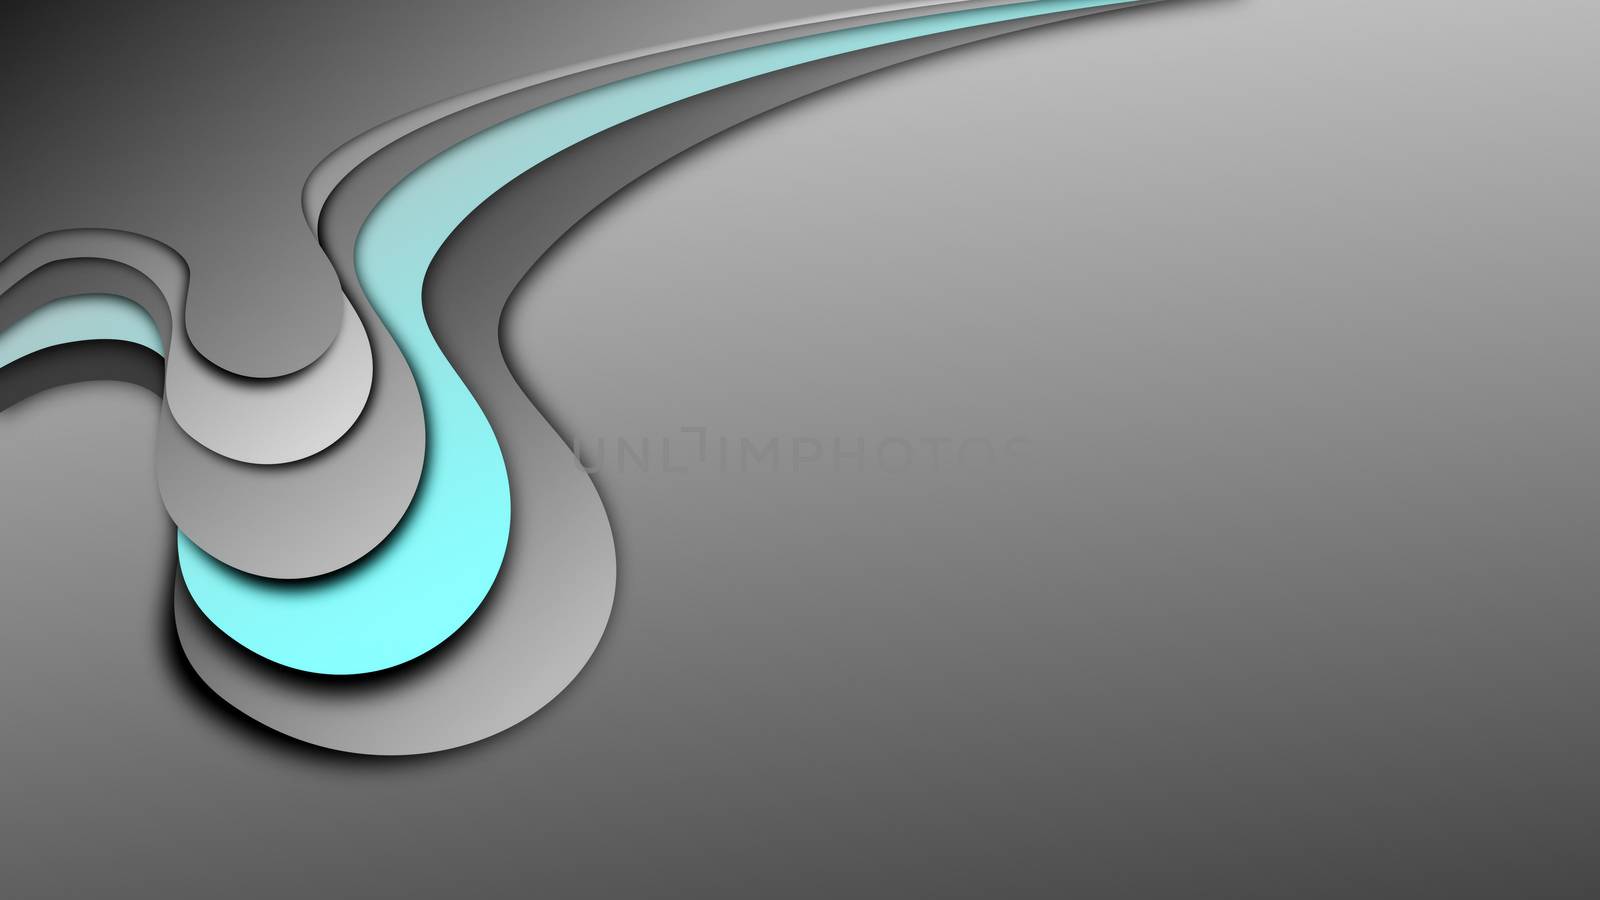 An illustration of a gray layers background with turquoise part